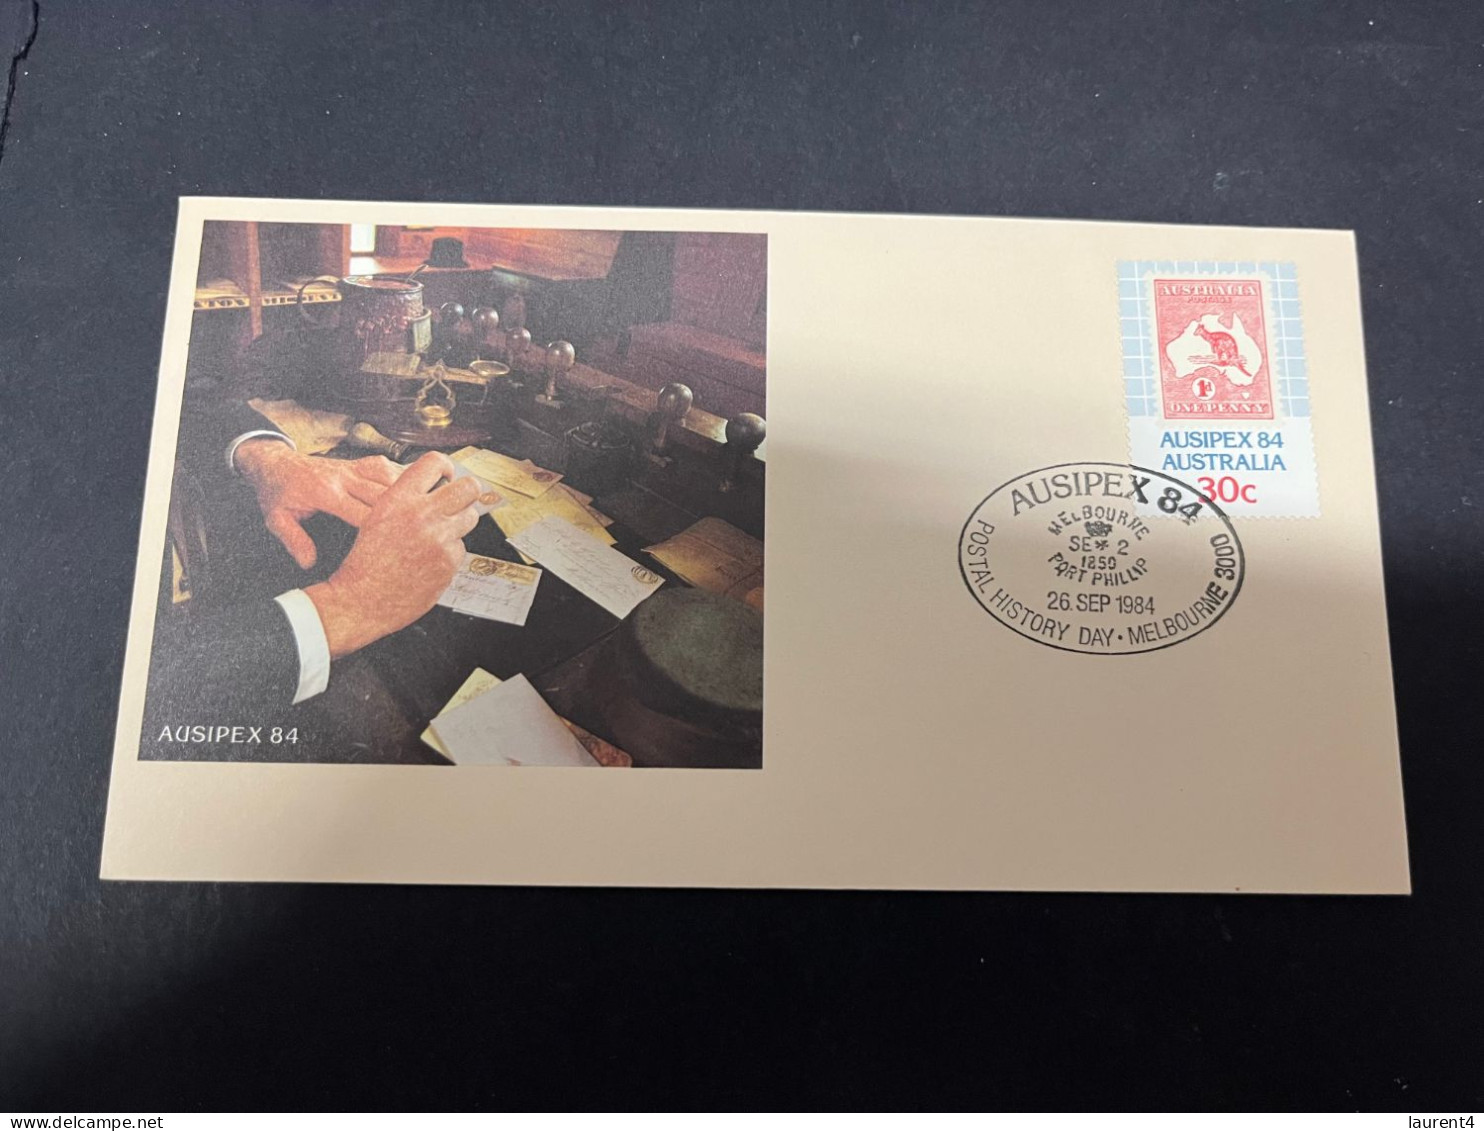 26-3-2024 (4 Y 9) Australia (5 With With Different Postmark) FDC - AUSSIPEX 84 (Melbourne Stamp Expo) - FDC